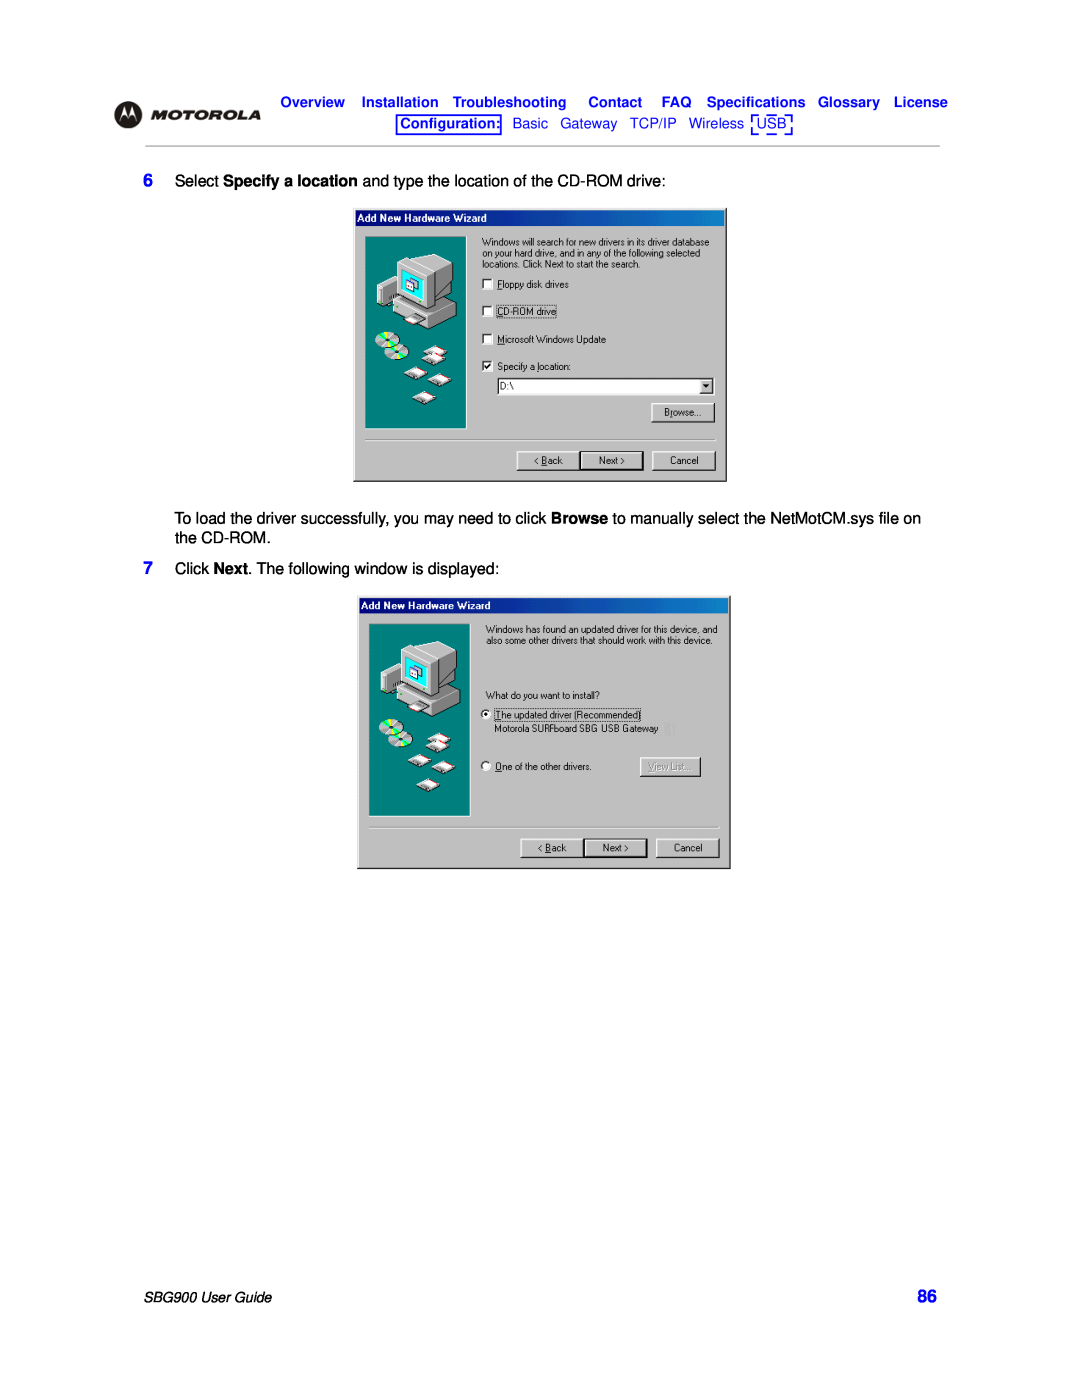 Motorola manual Select Specify a location and type the location of the CD-ROM drive, SBG900 User Guide 